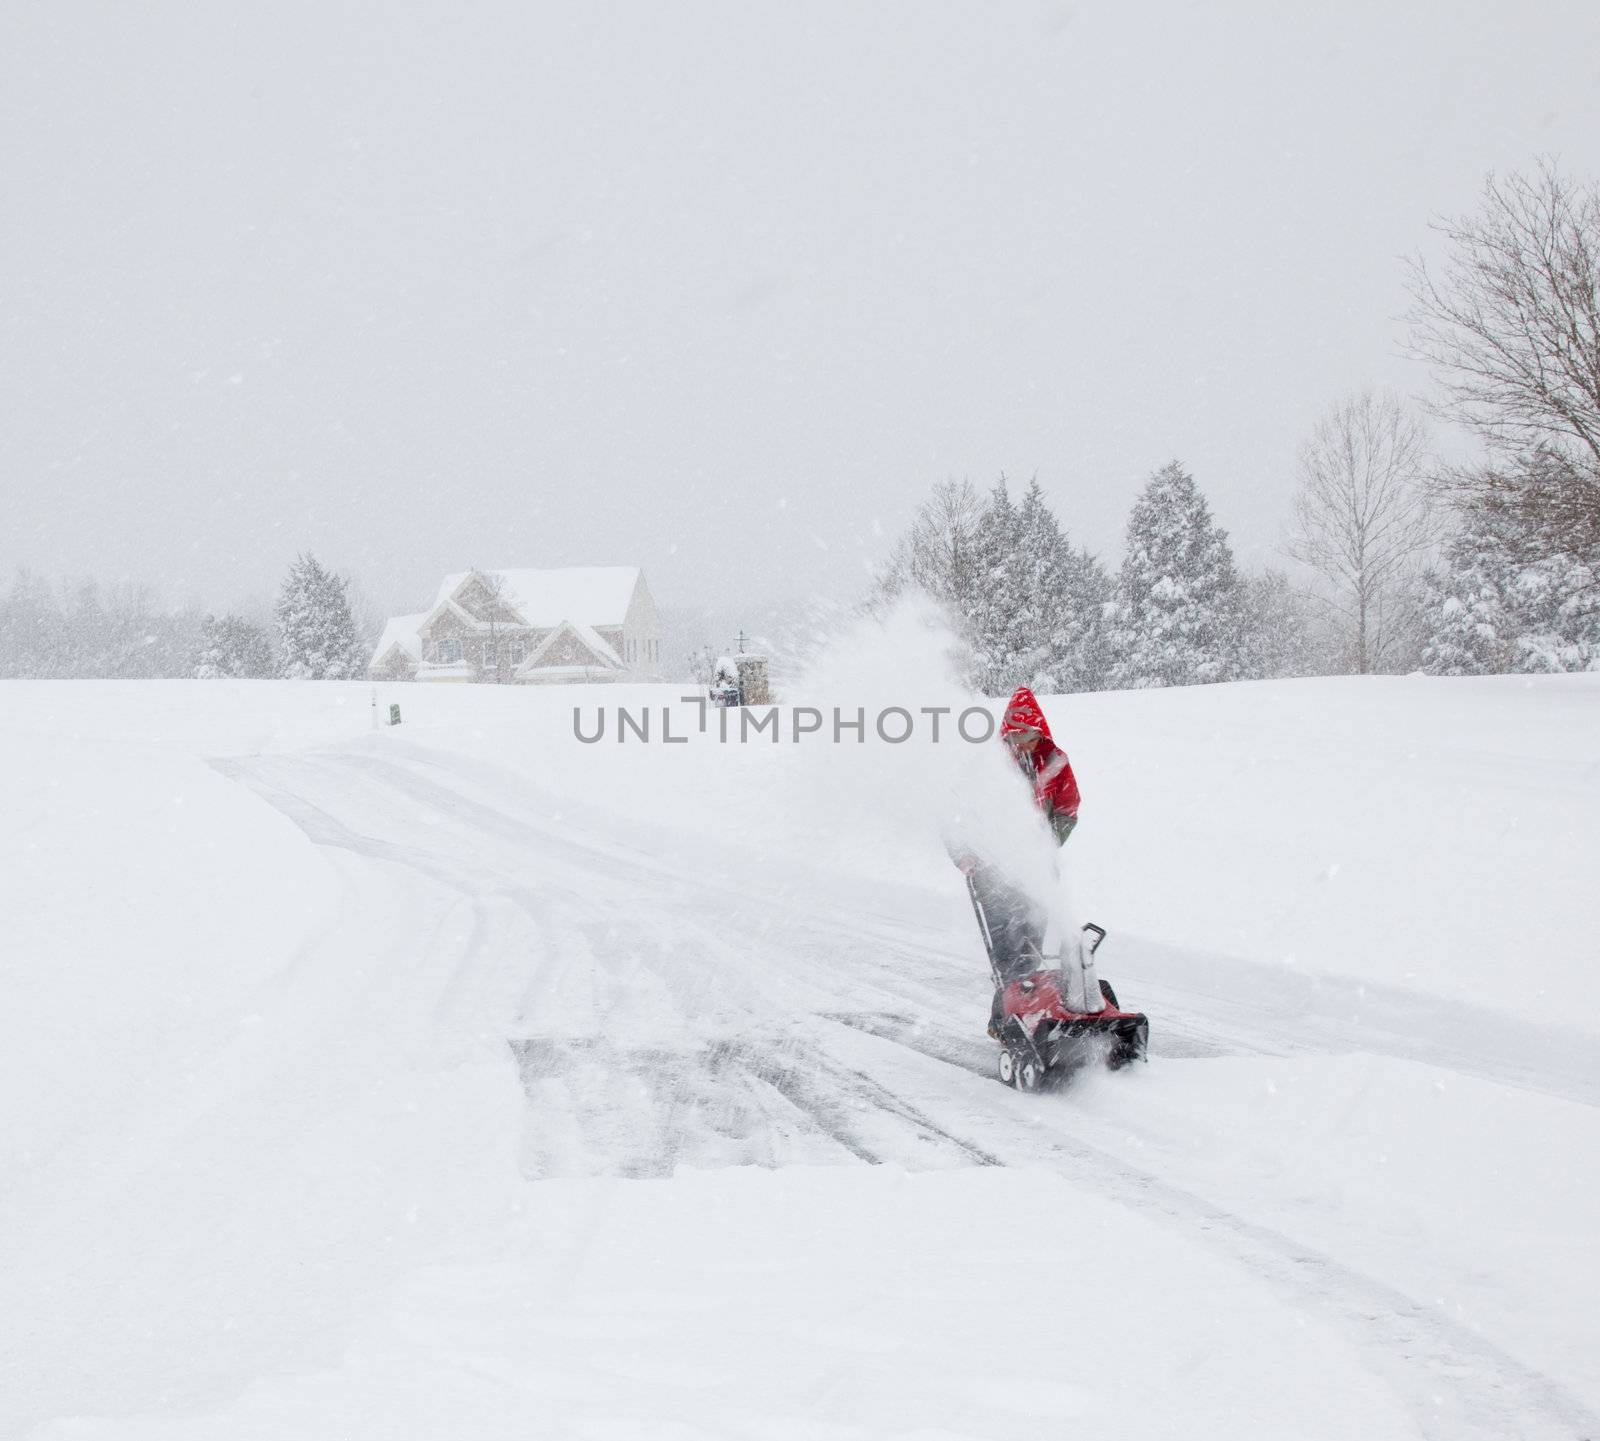 Senior man in red coat using a snow blower during a blizzard on home drive